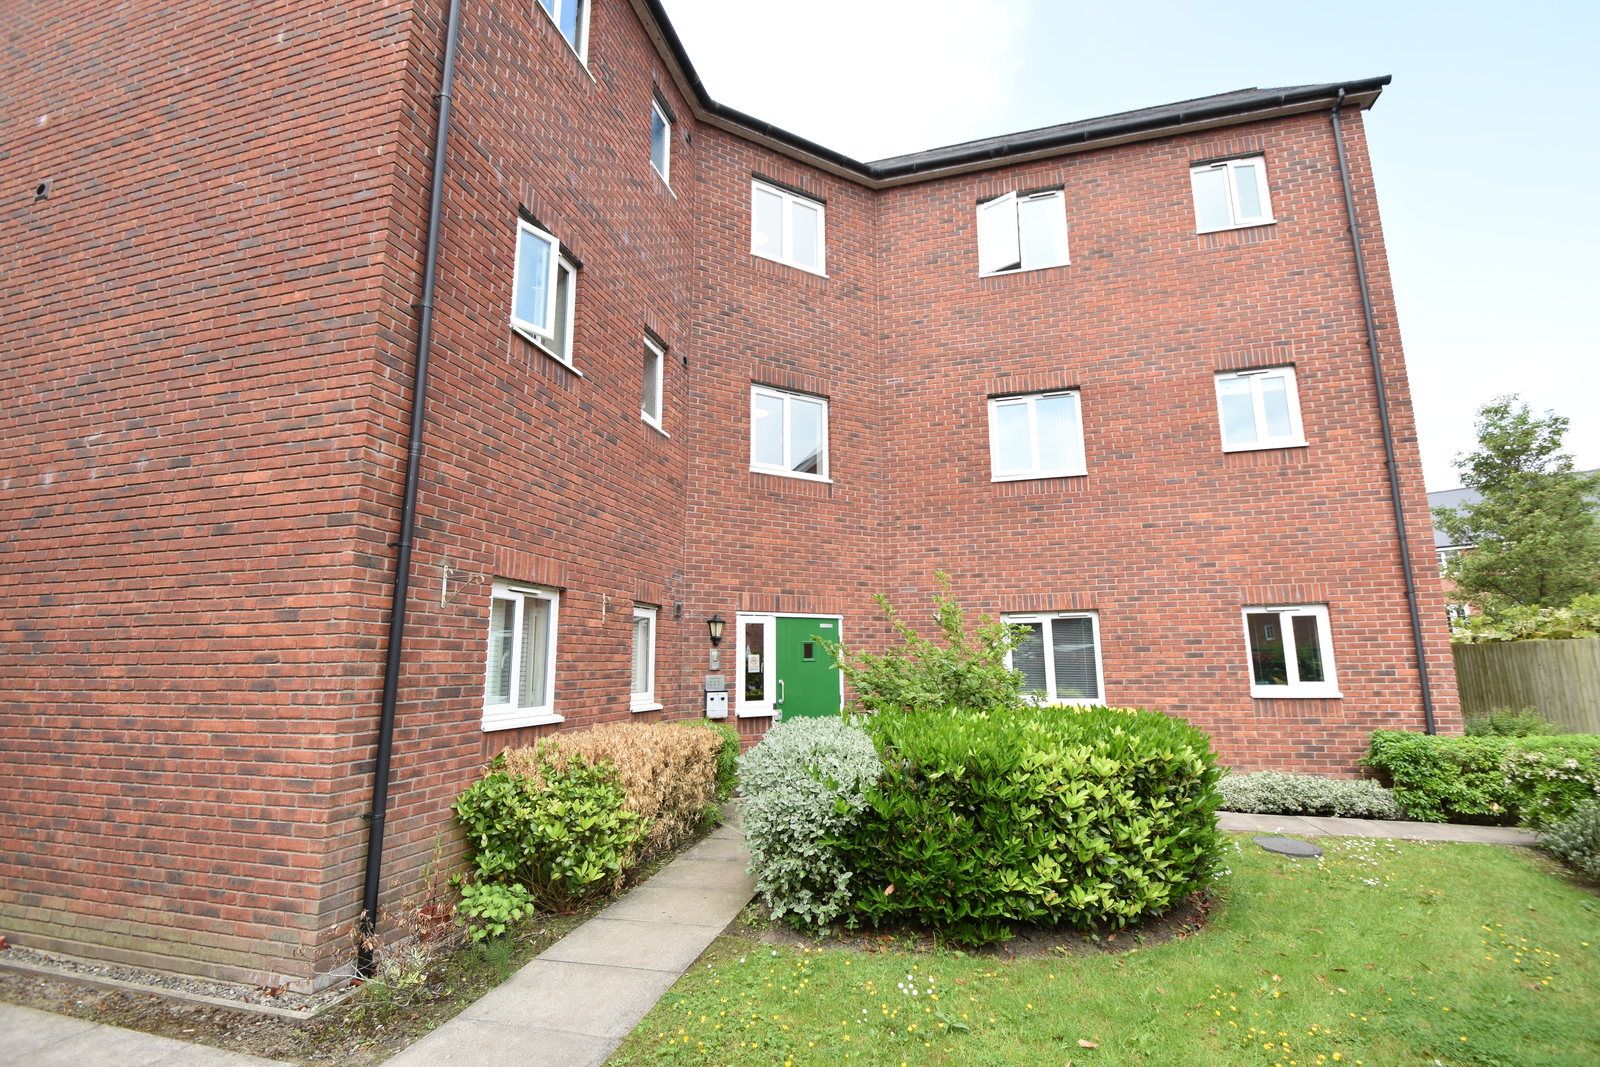 Irwell Place, Radcliffe, Manchester, Manchester, M26 1PW